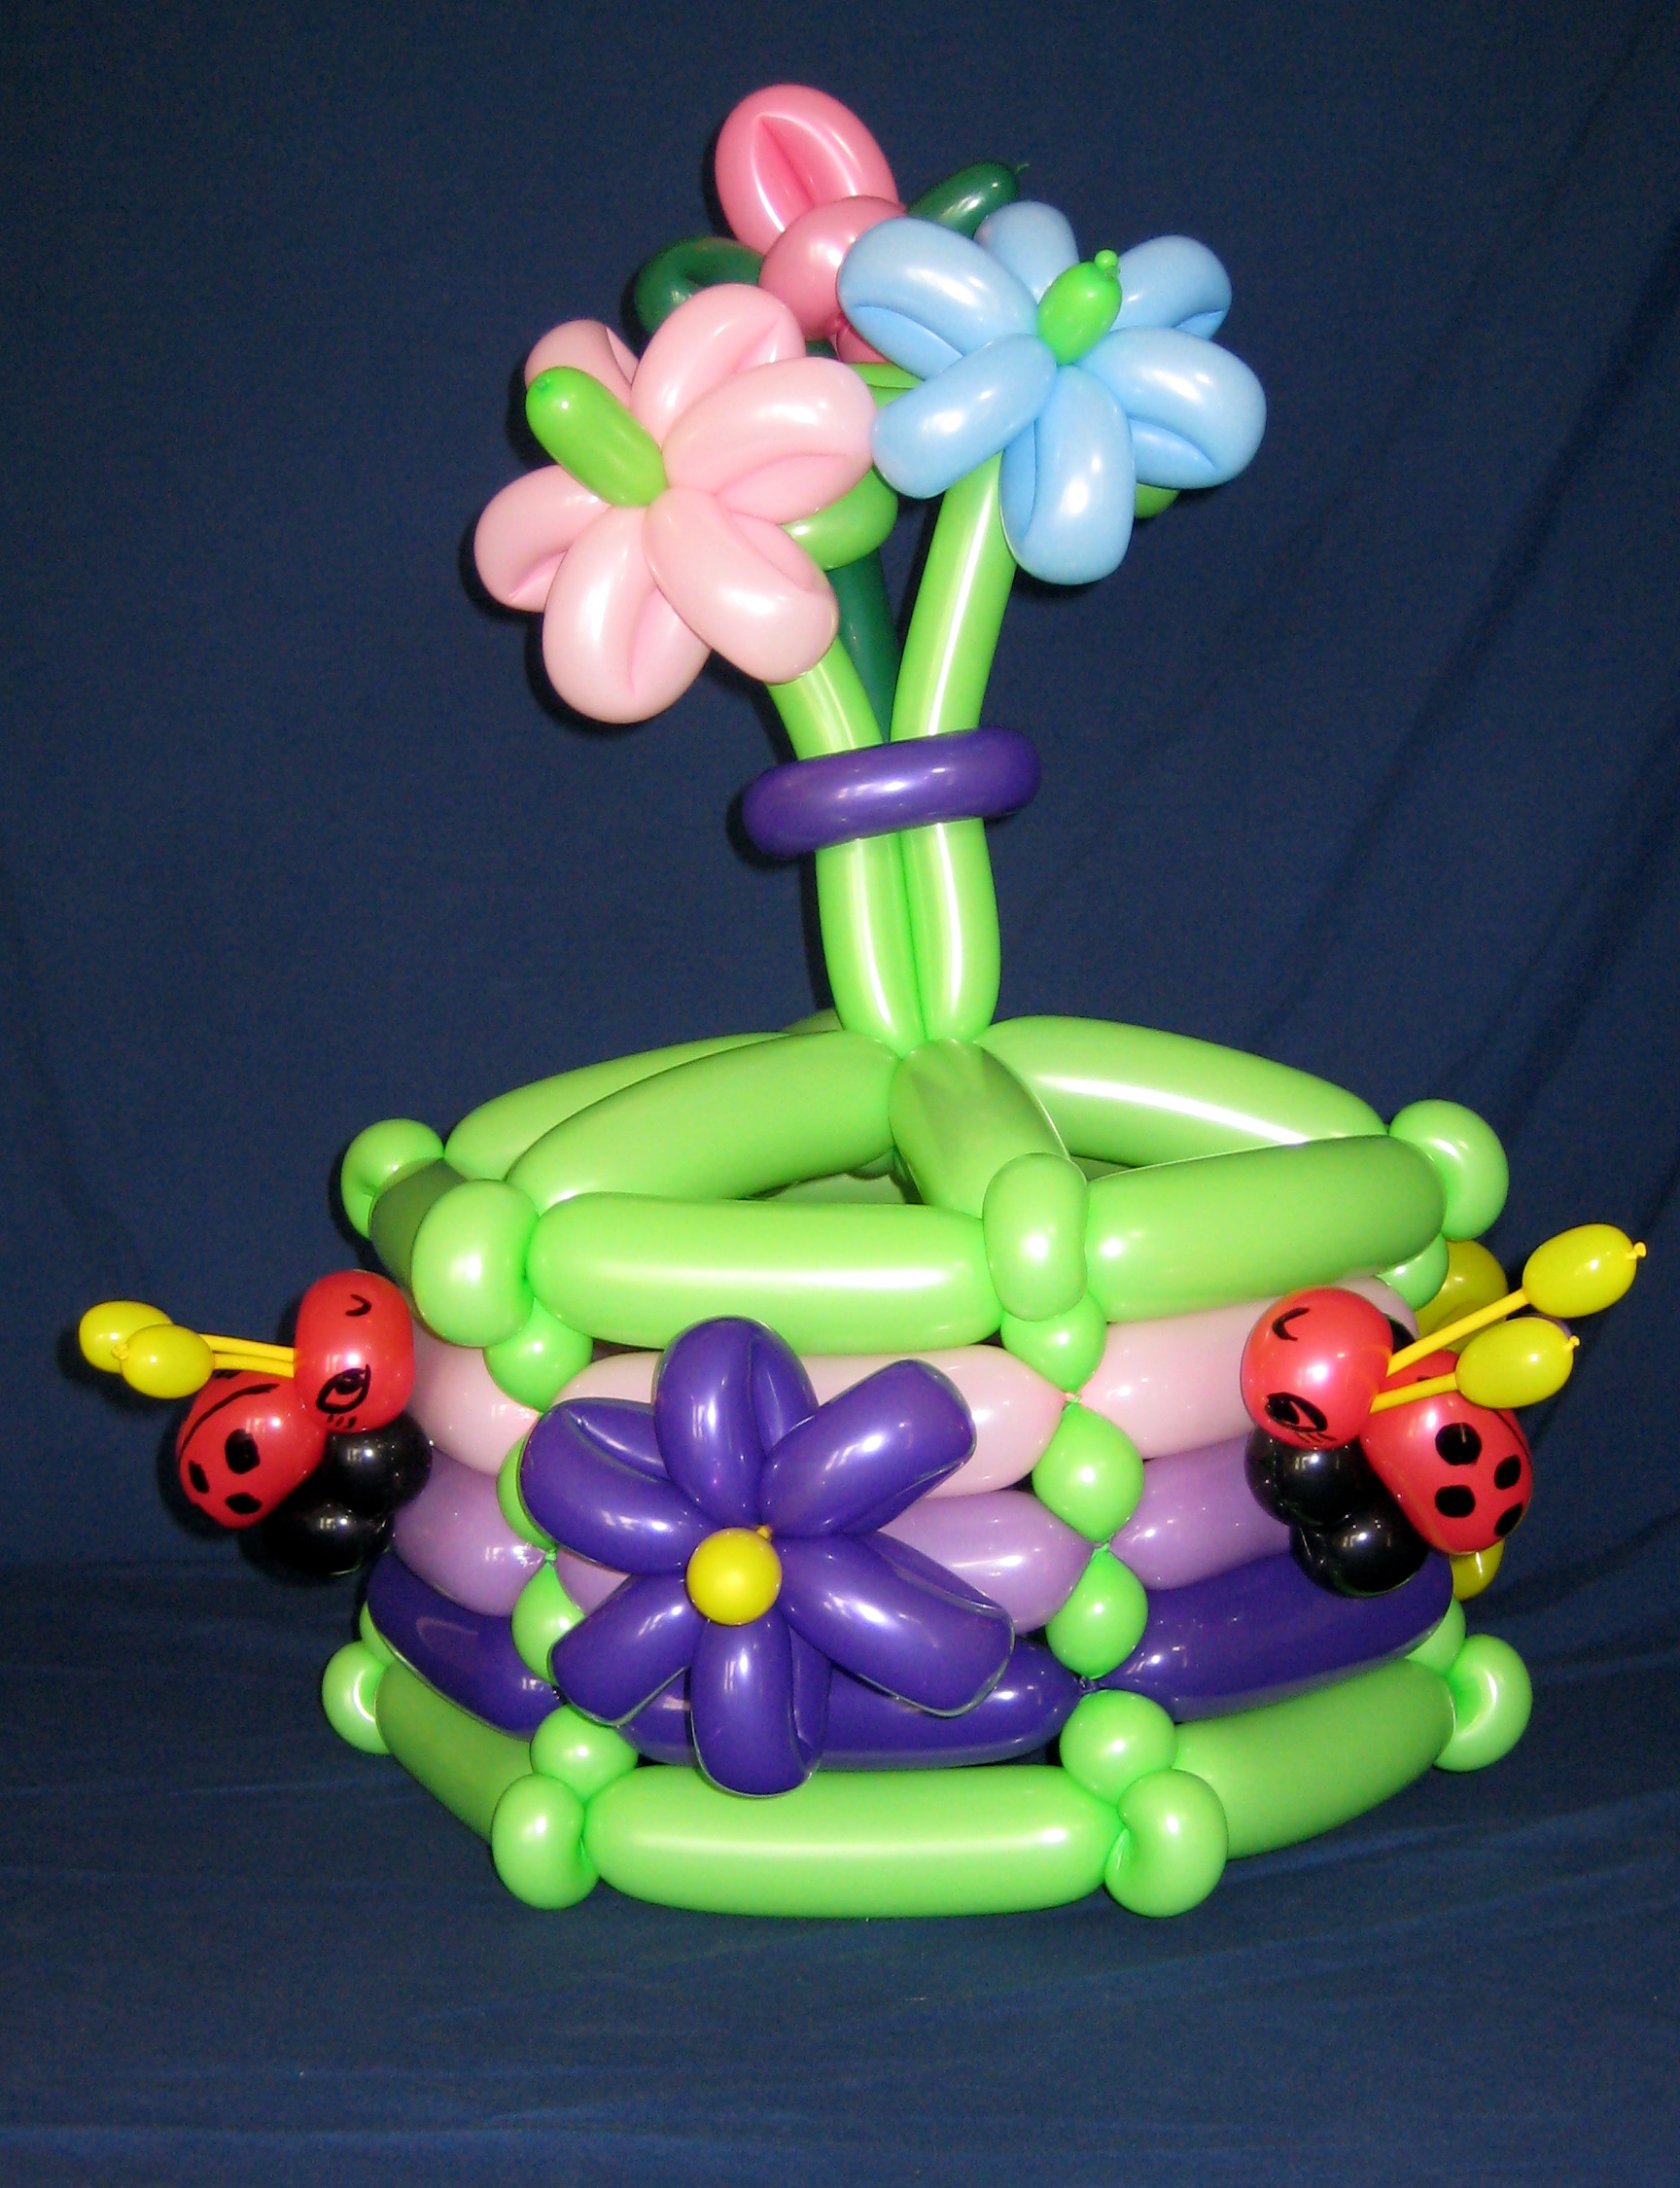 http://www.balloonamations.com/images/Centerpieces/Balloon%20Cake%20-%20Flowers%20-%20LARGE.JPG